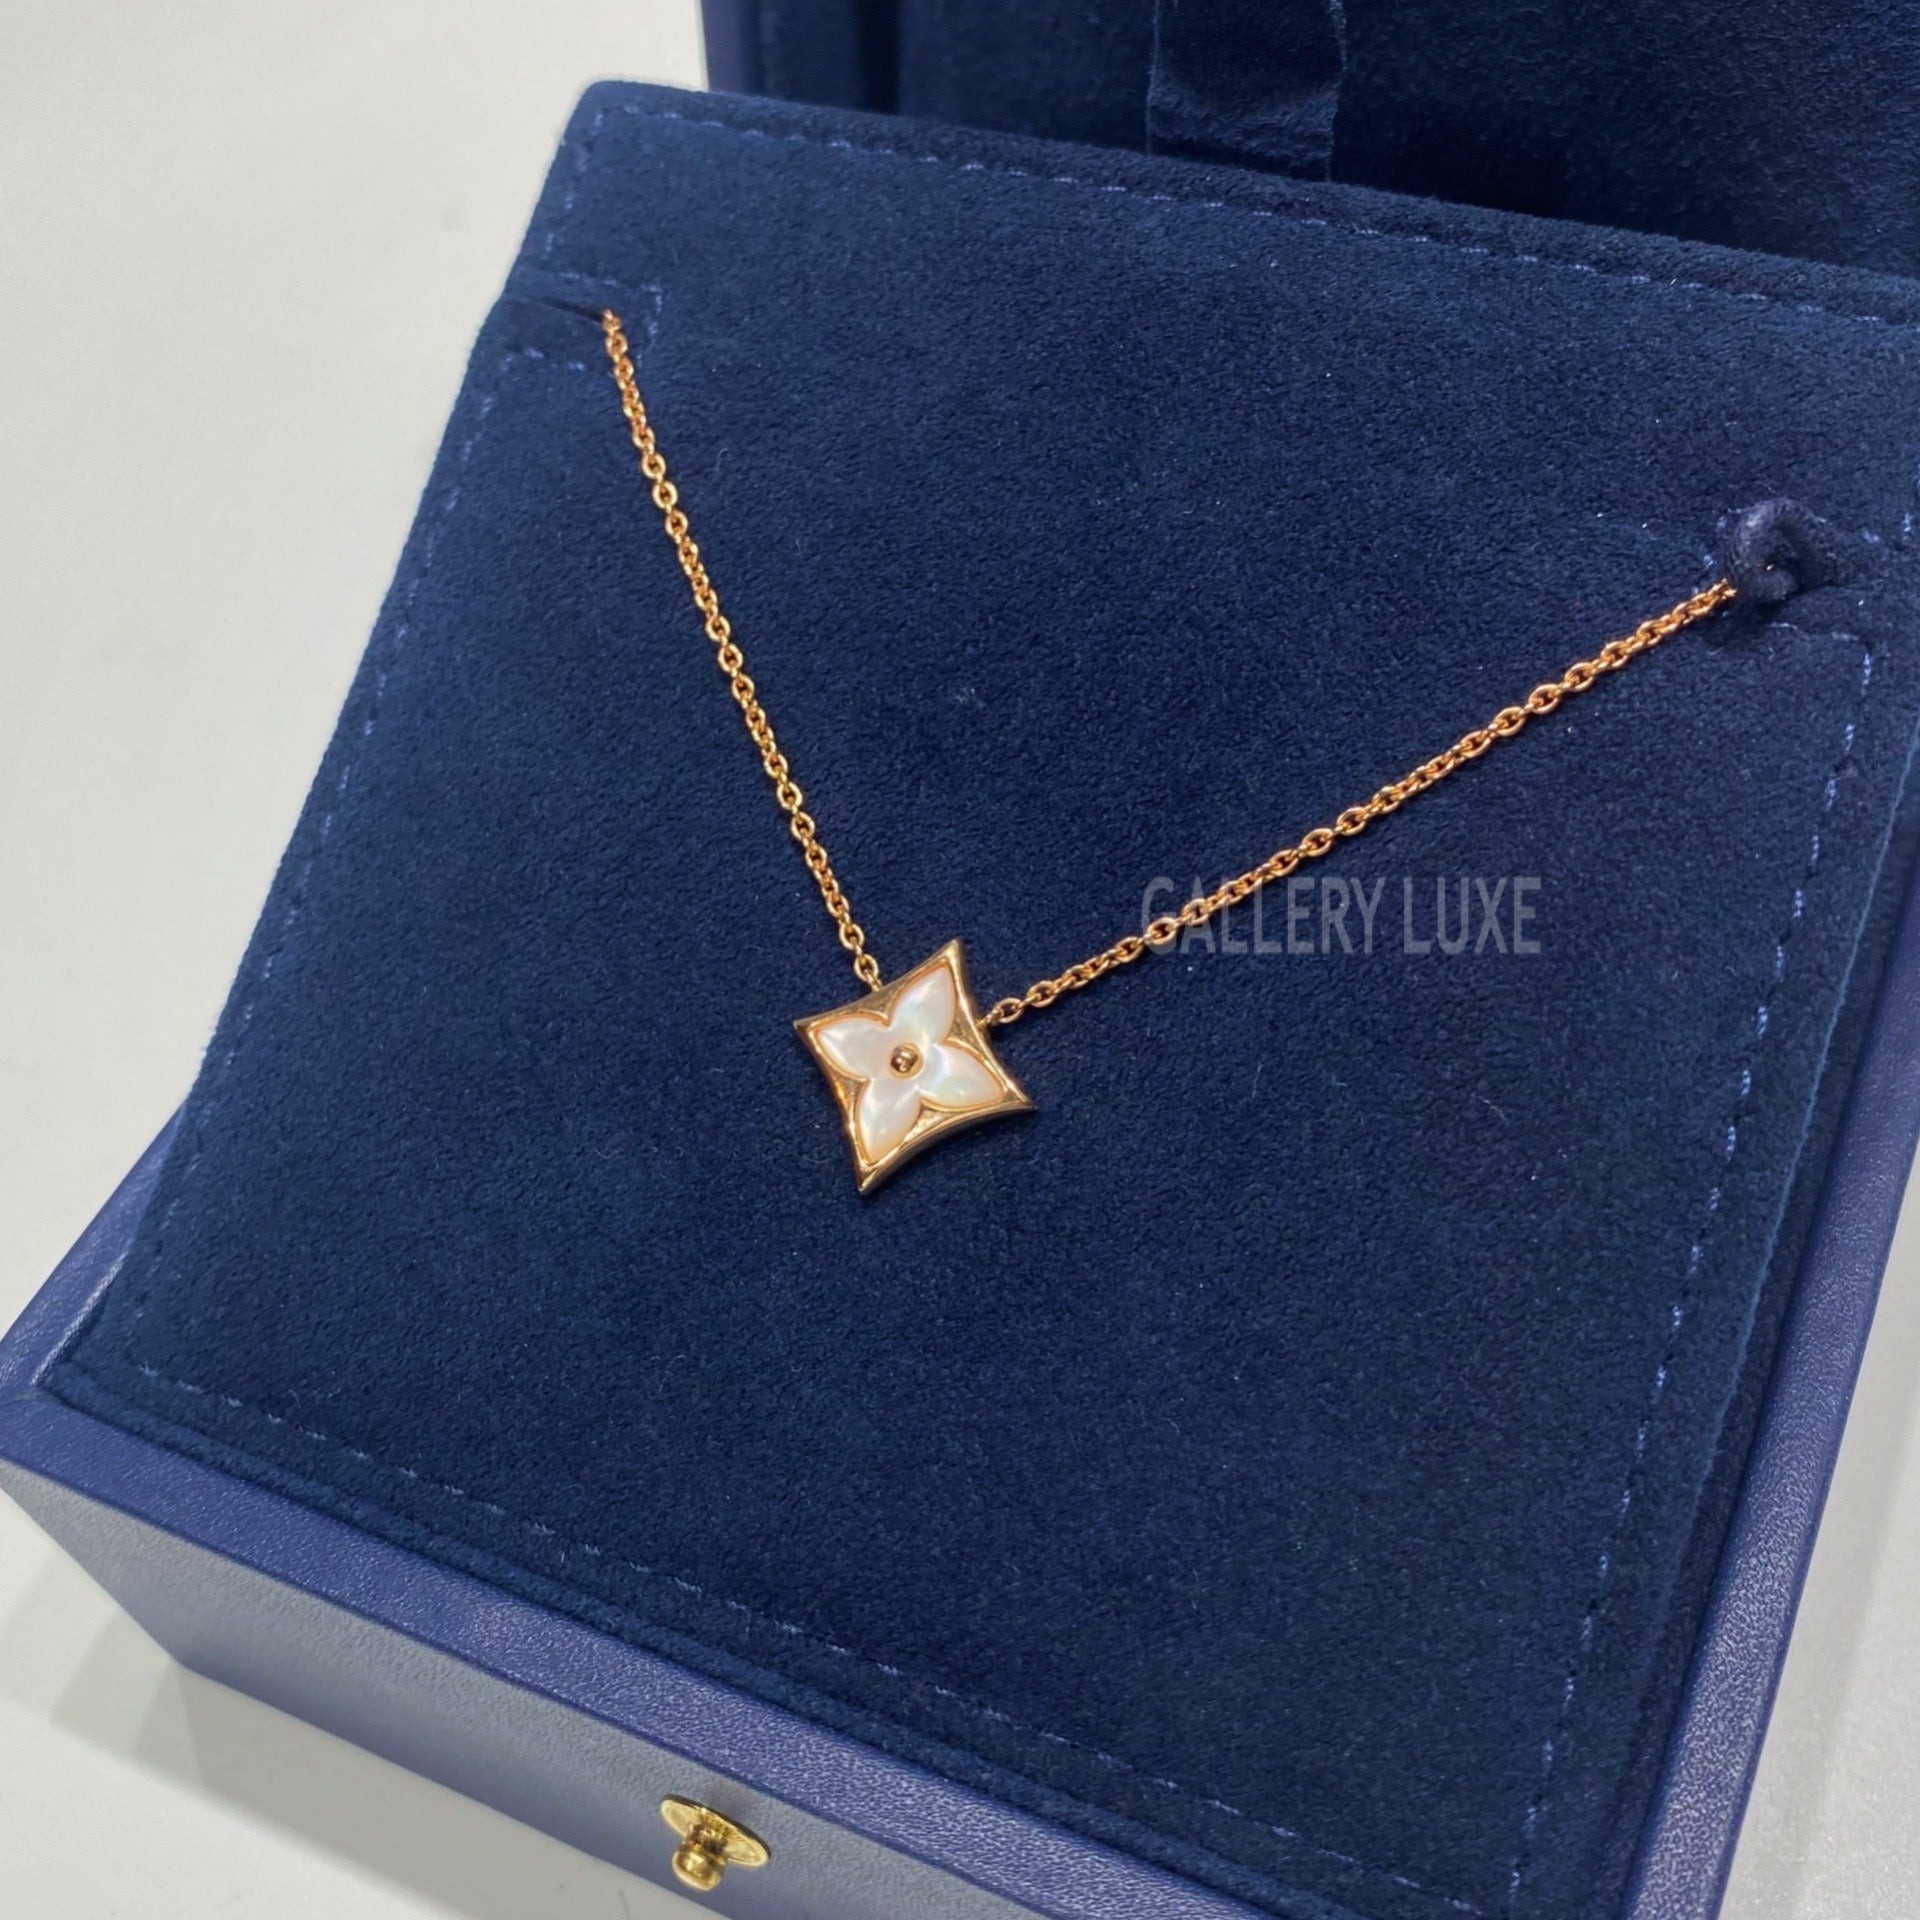 LOUIS VUITTON COLOR BLOSSOM BB STAR PENDANT PINK GOLD PINK MOTHER